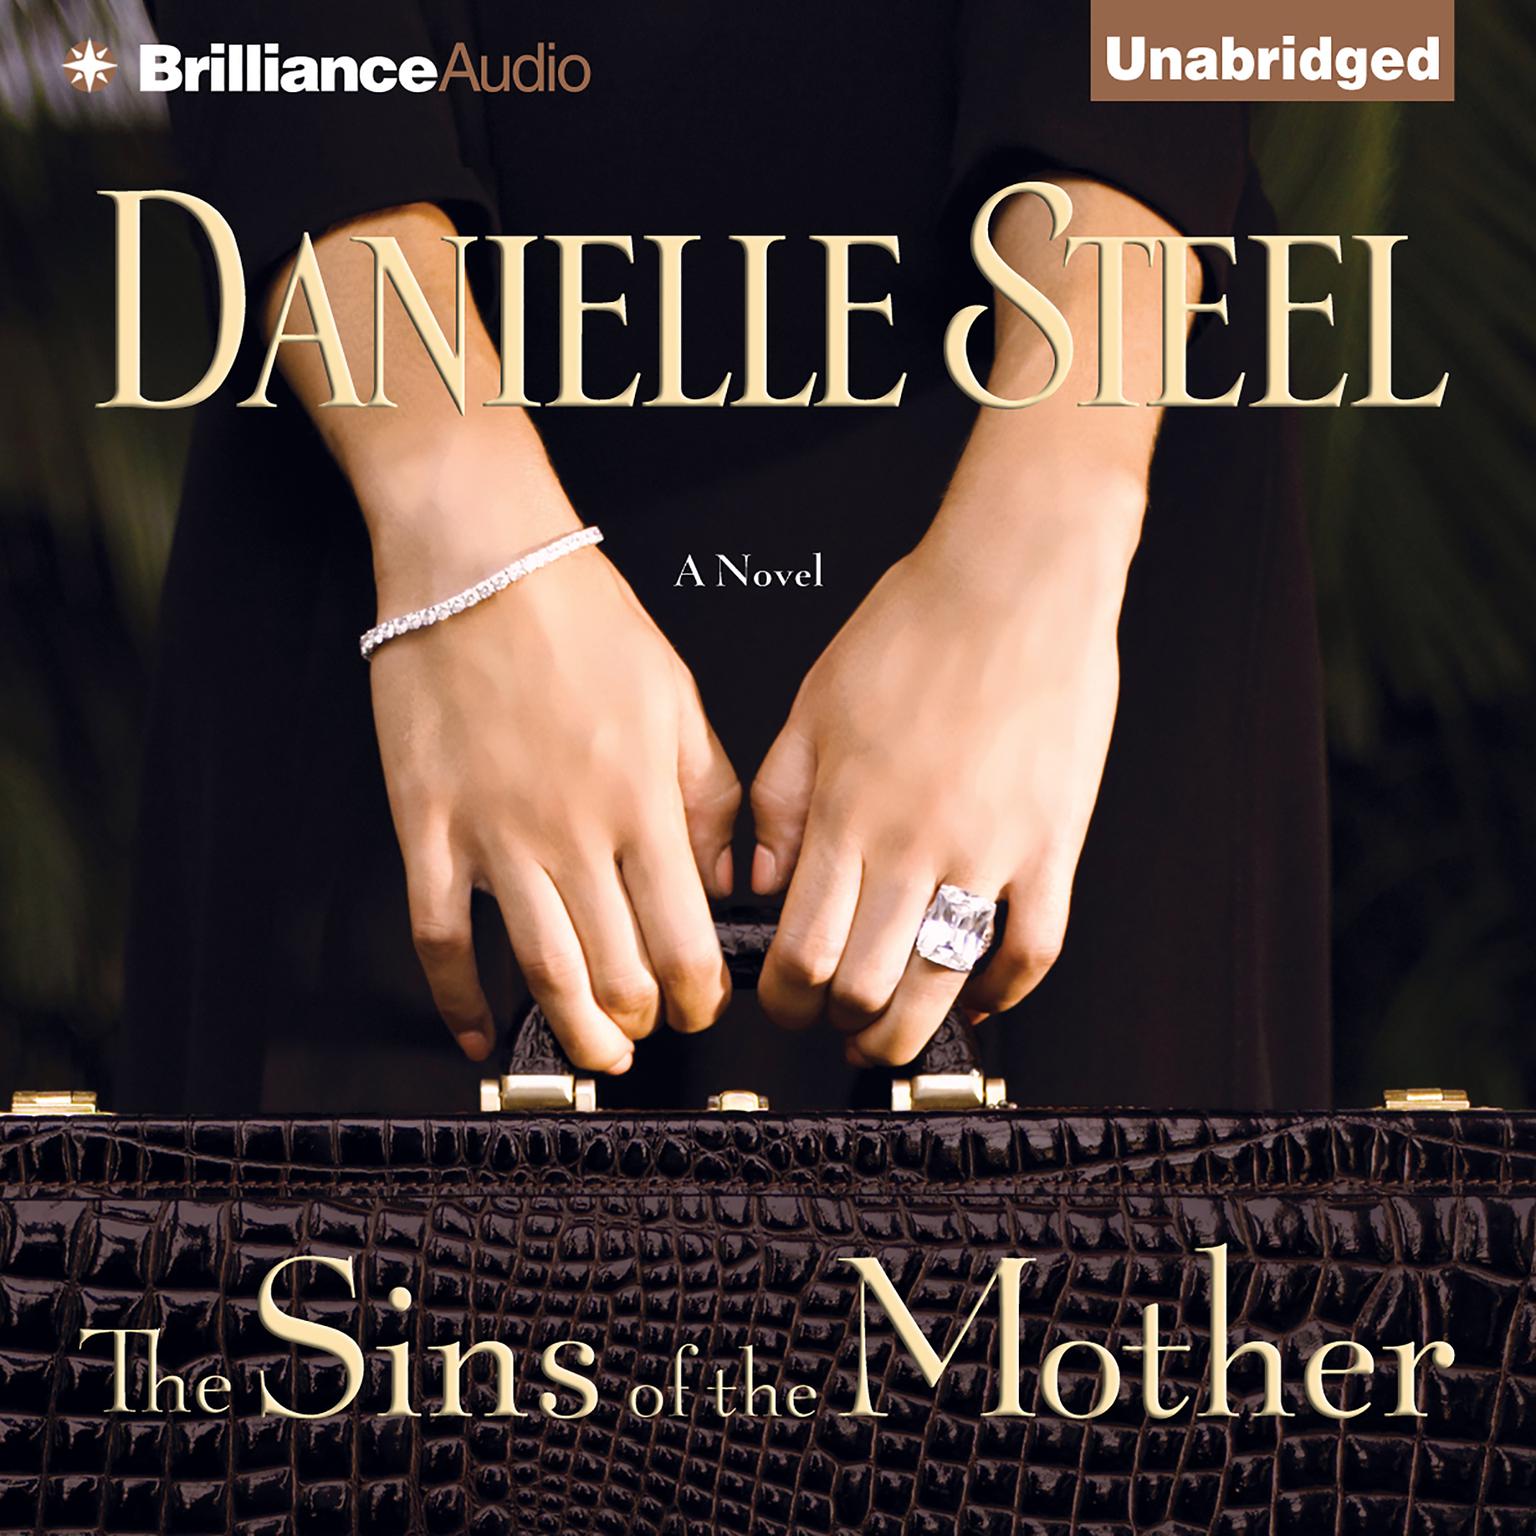 The Sins of the Mother: A Novel Audiobook, by Danielle Steel